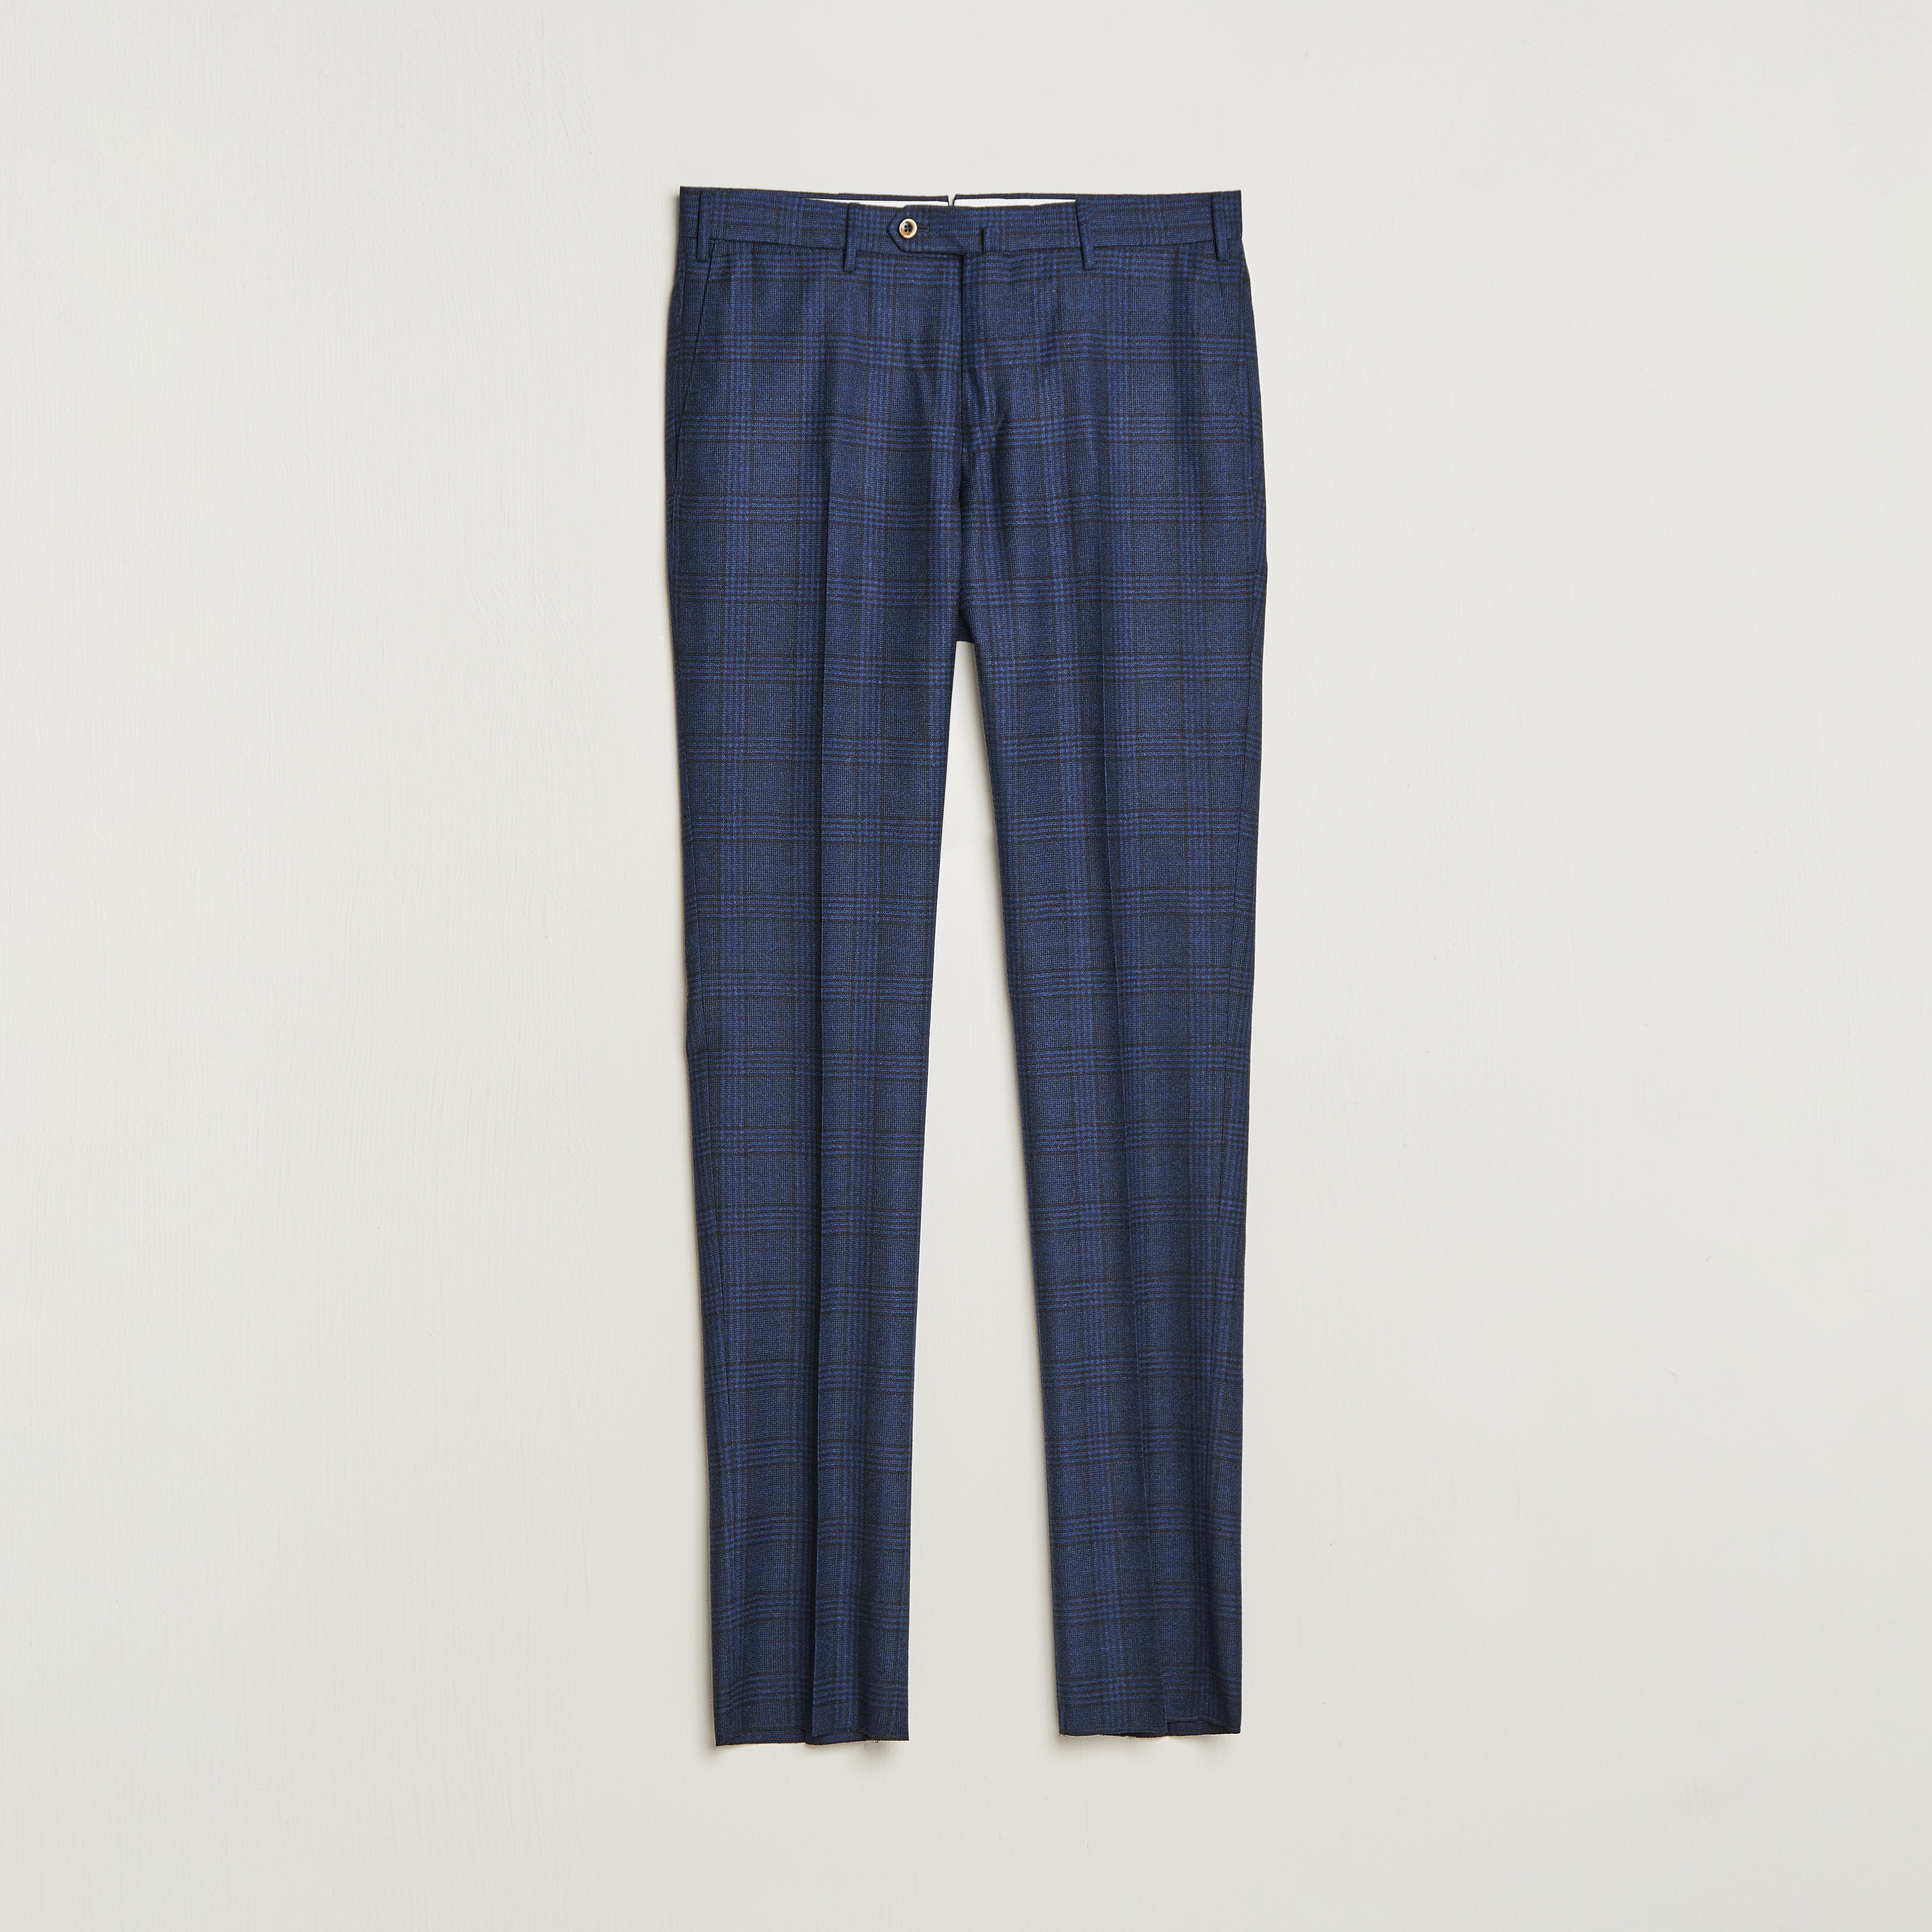 PT01 Slim Fit Prince Of Wales Wool Trousers Navy at CareOfCarl.com